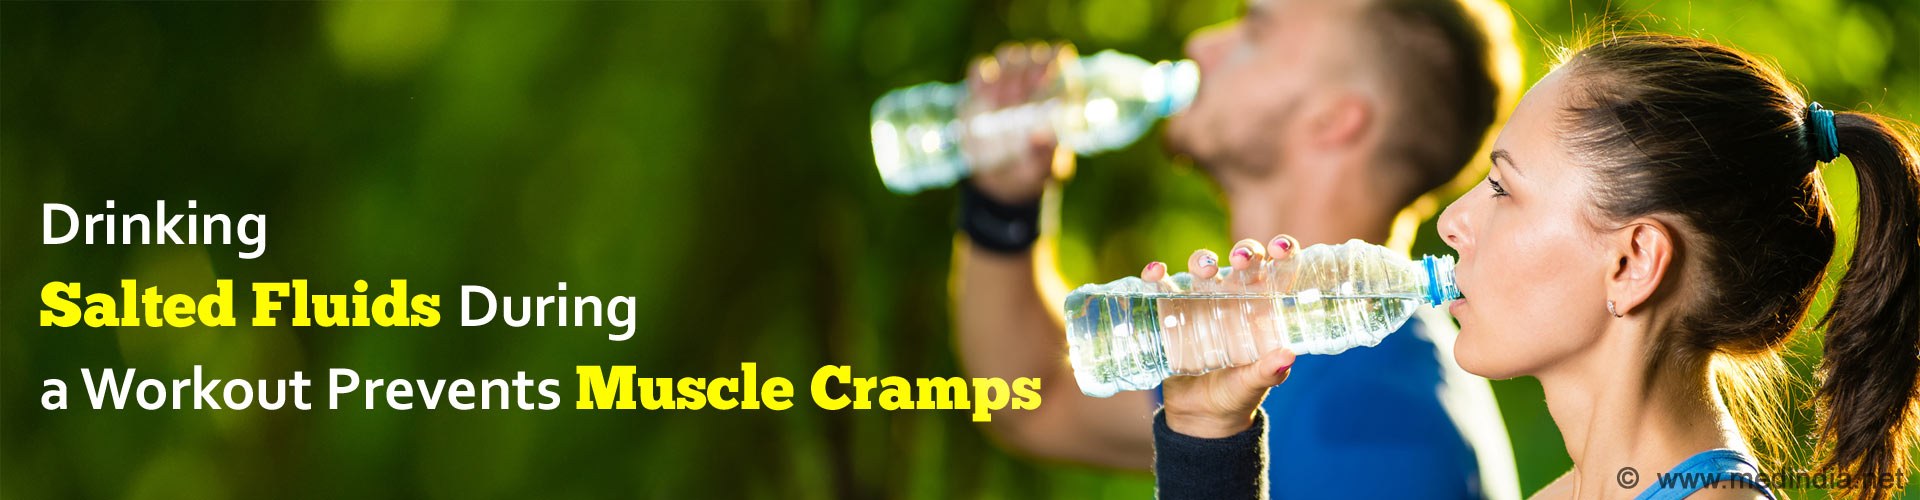 Drinking Salted Liquids During a Workout Prevents Muscle Cramps